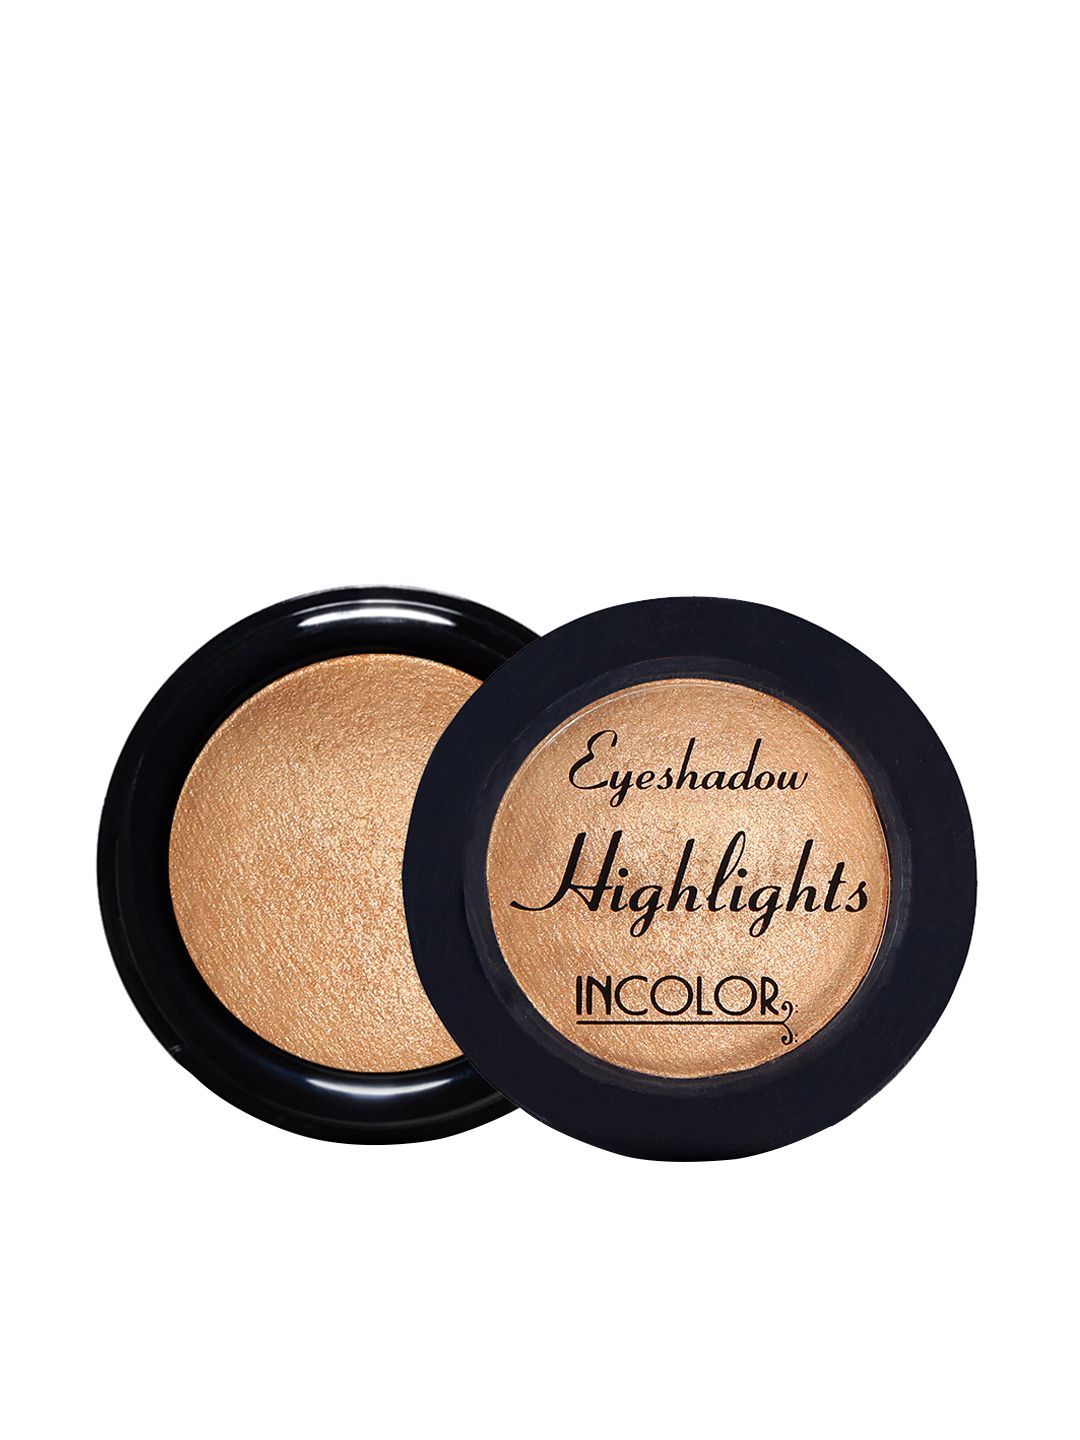 INCOLOR Cream Pop 29 Highlighter Eye Shadow Price in India